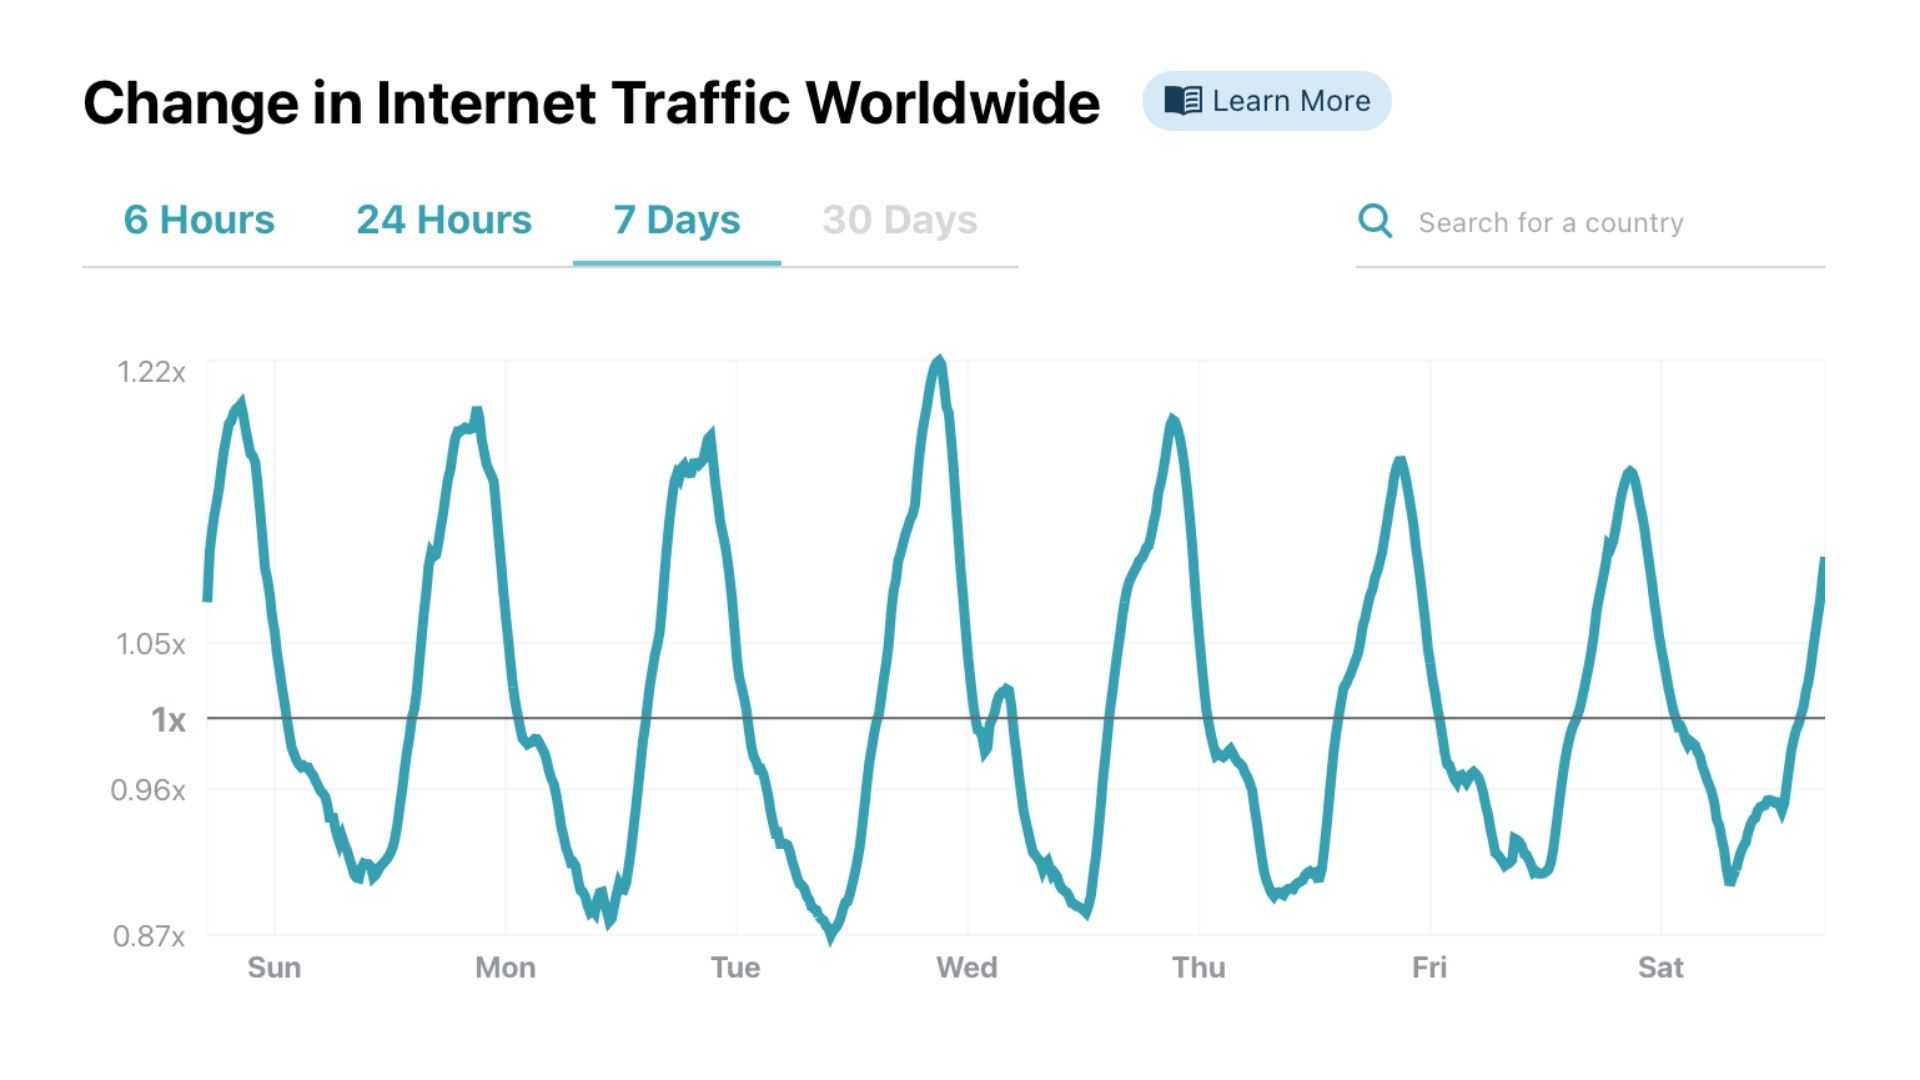 Cloudflare launches Radar, a free dashboard with insights on domains and internet usage